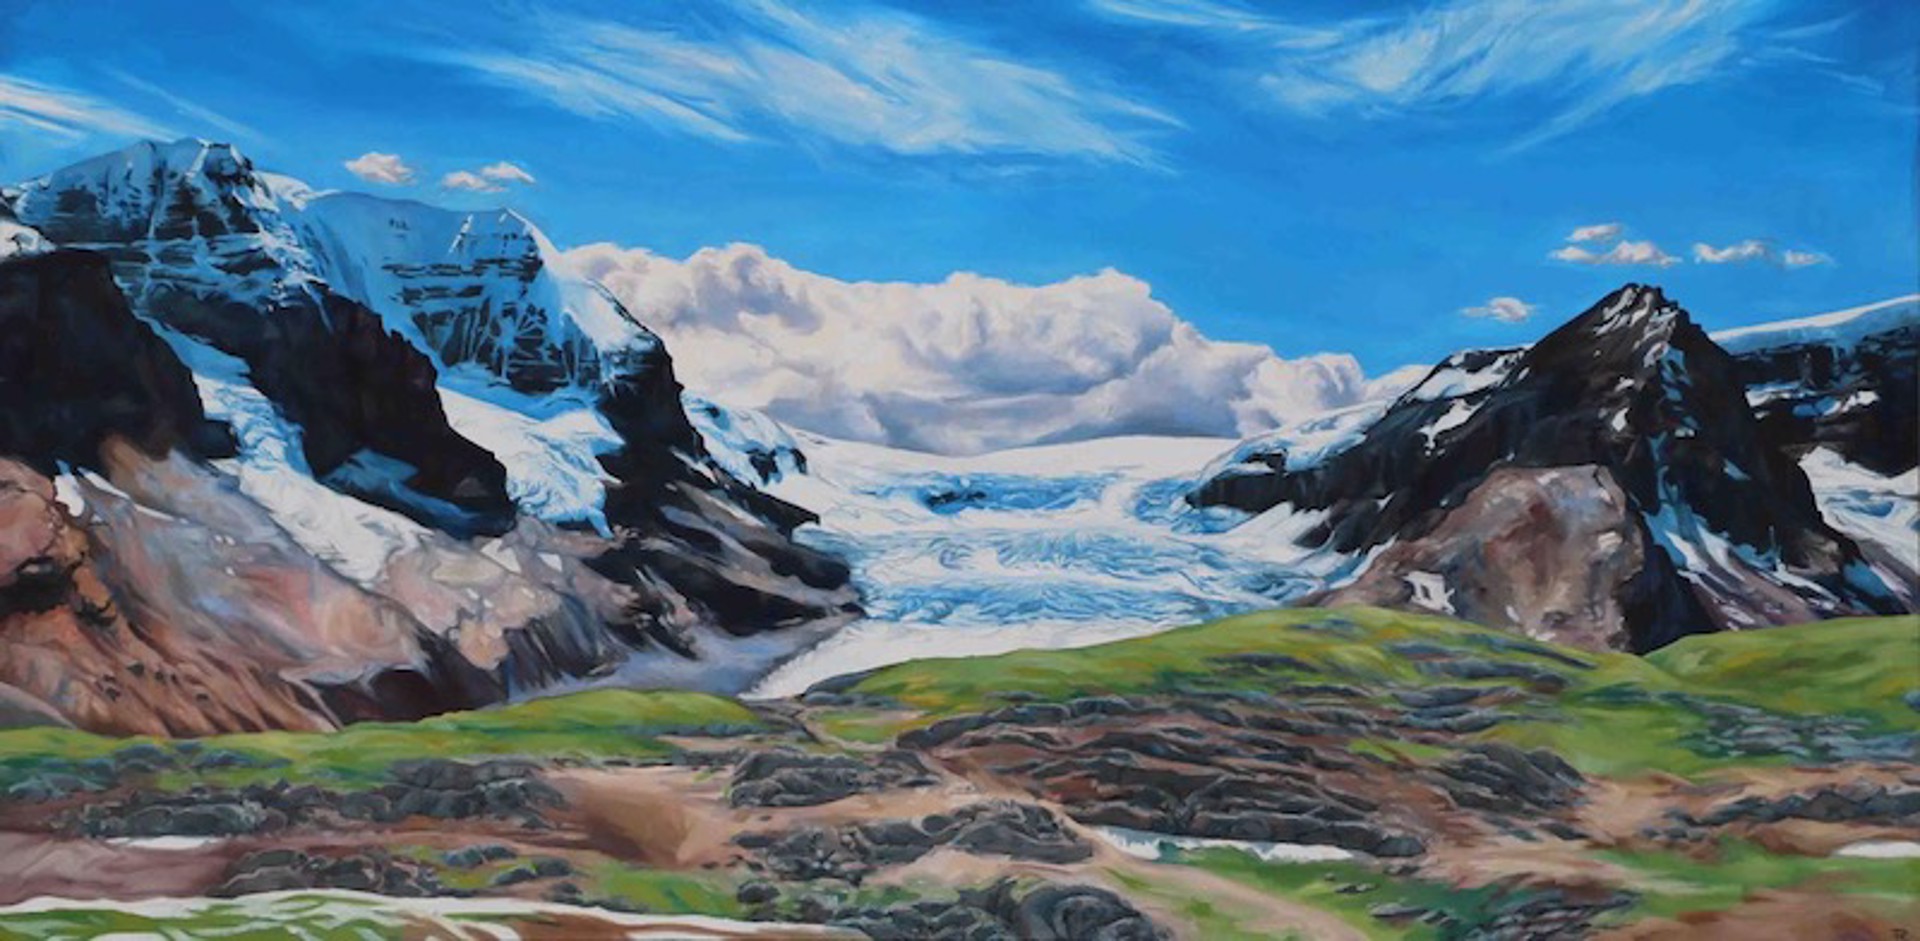 Athabasca Glacier (panel #2 of Triptych) by Pascale Robinson